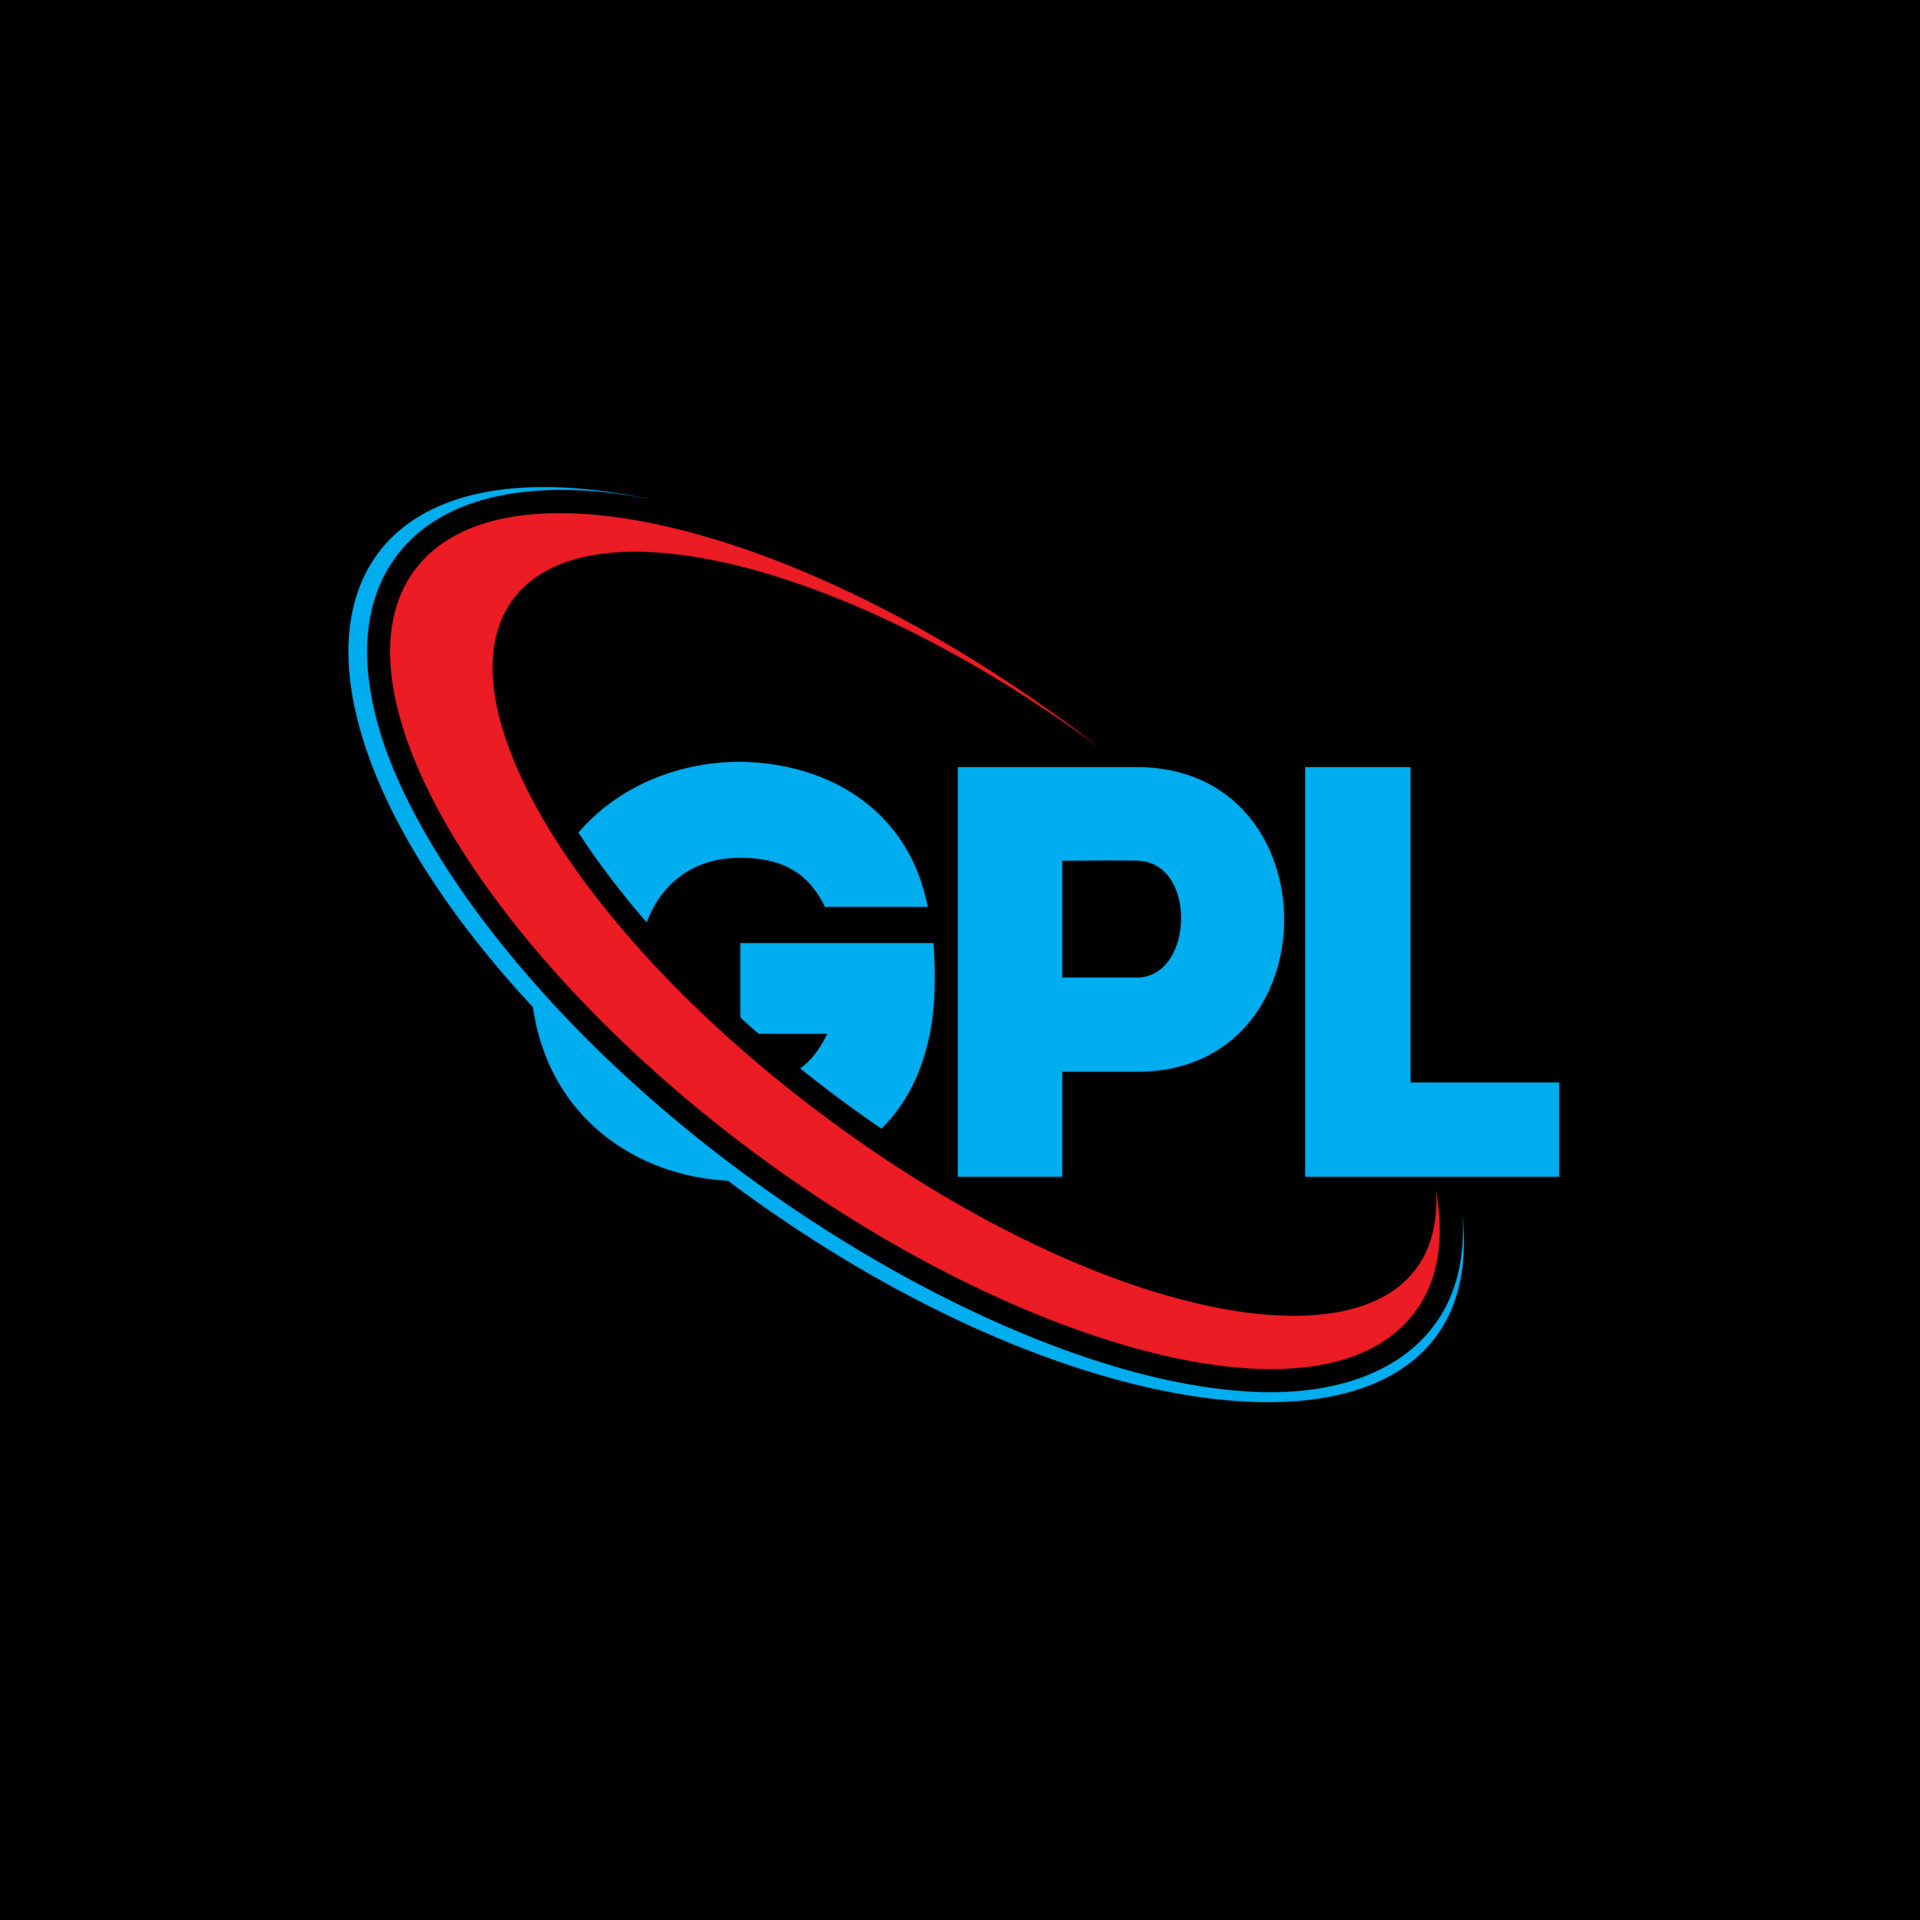 can GPL license be used commercially